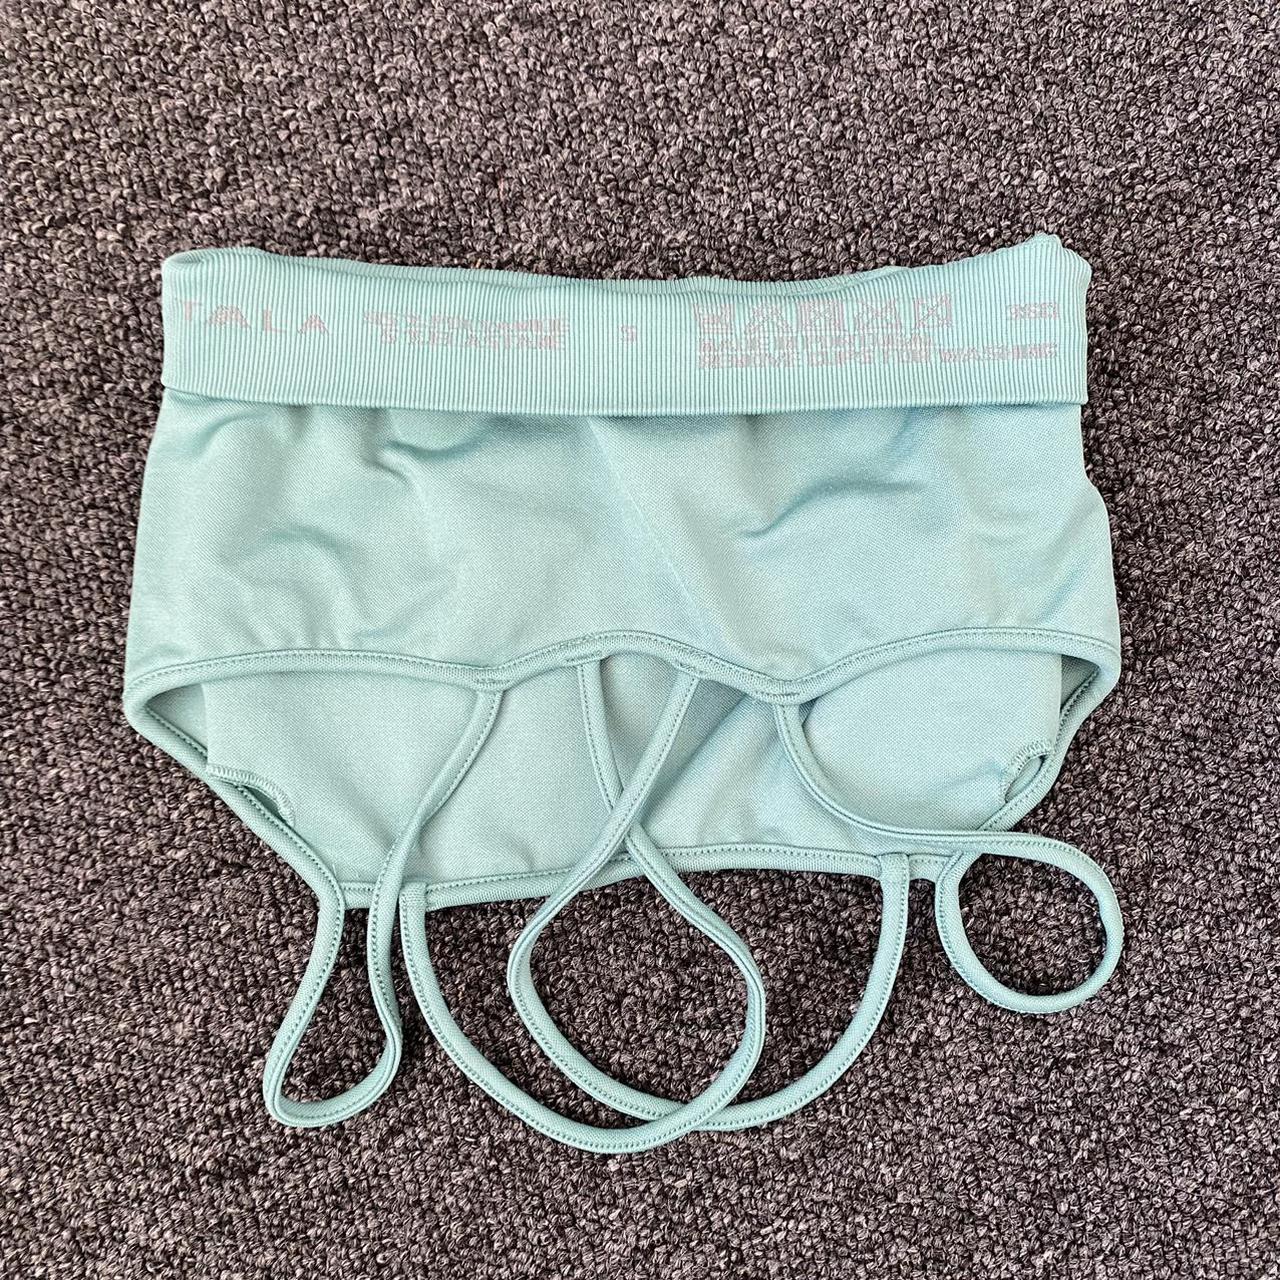 TALA SOLASTA BRA IN SEA Currently SOLD OUT on TALA - Depop